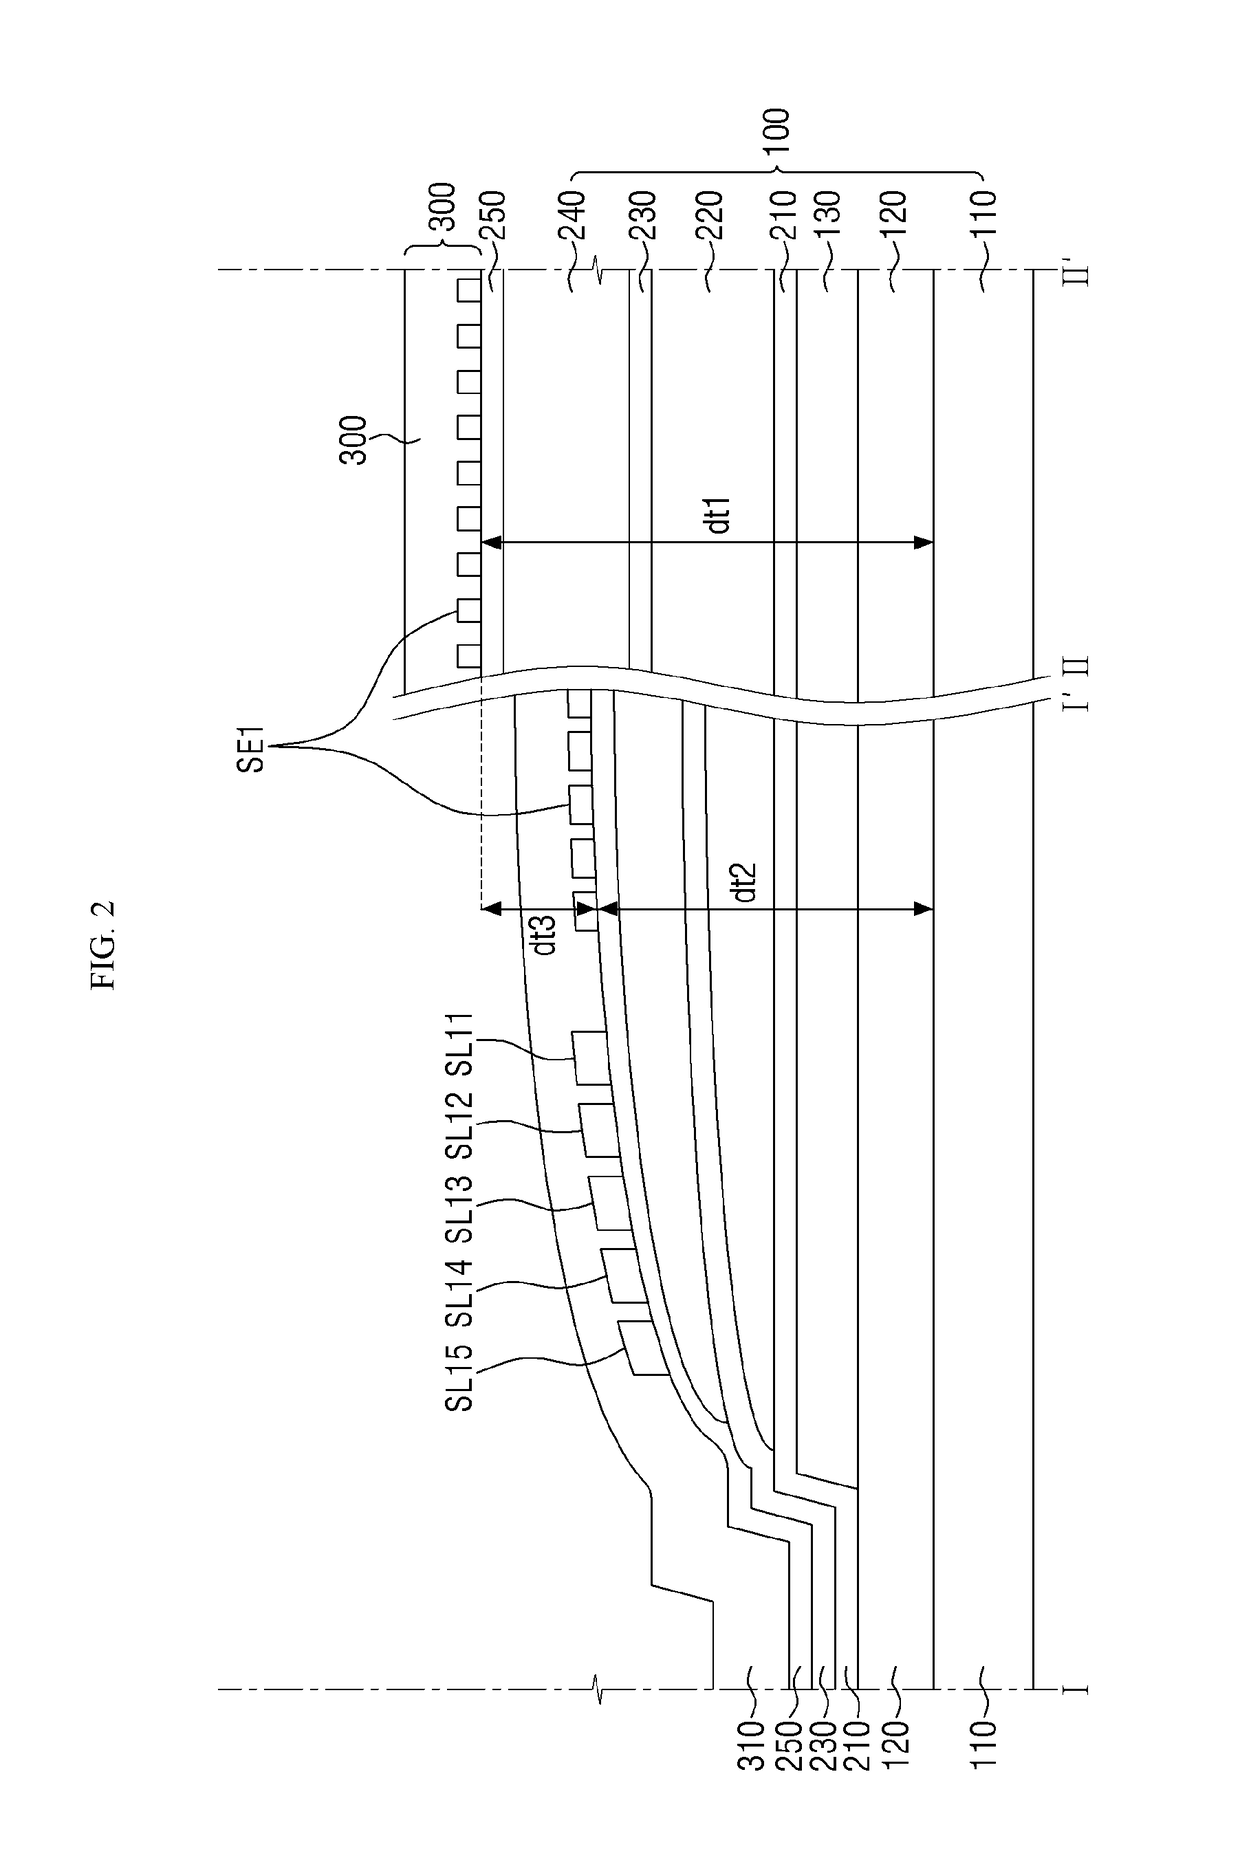 Display device including touch sensing layer